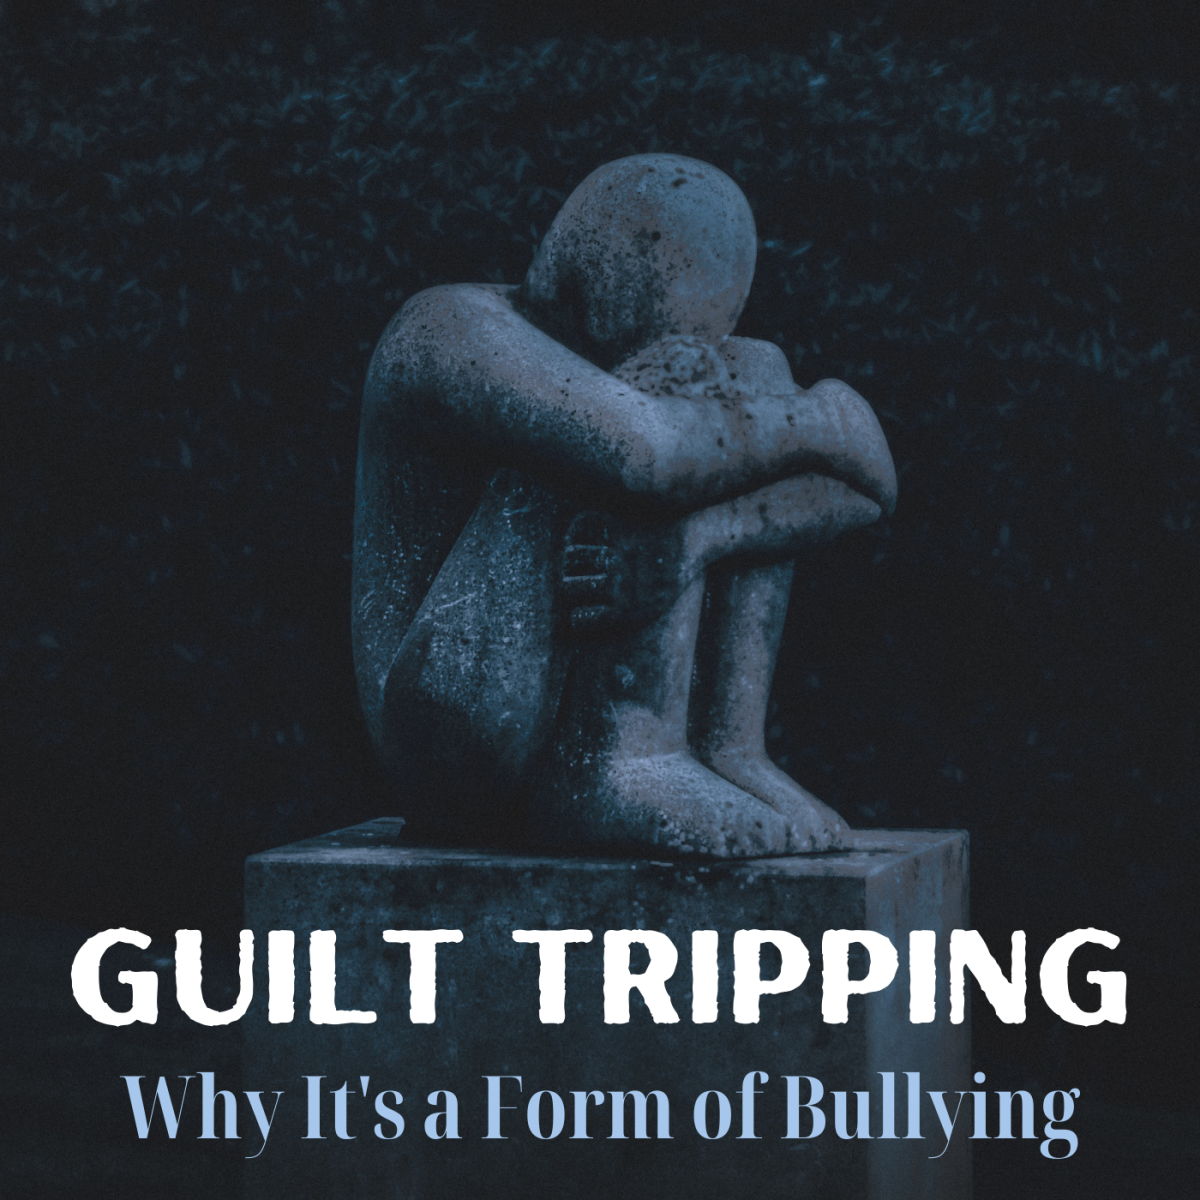 Explore the dangers of guilt tripping.